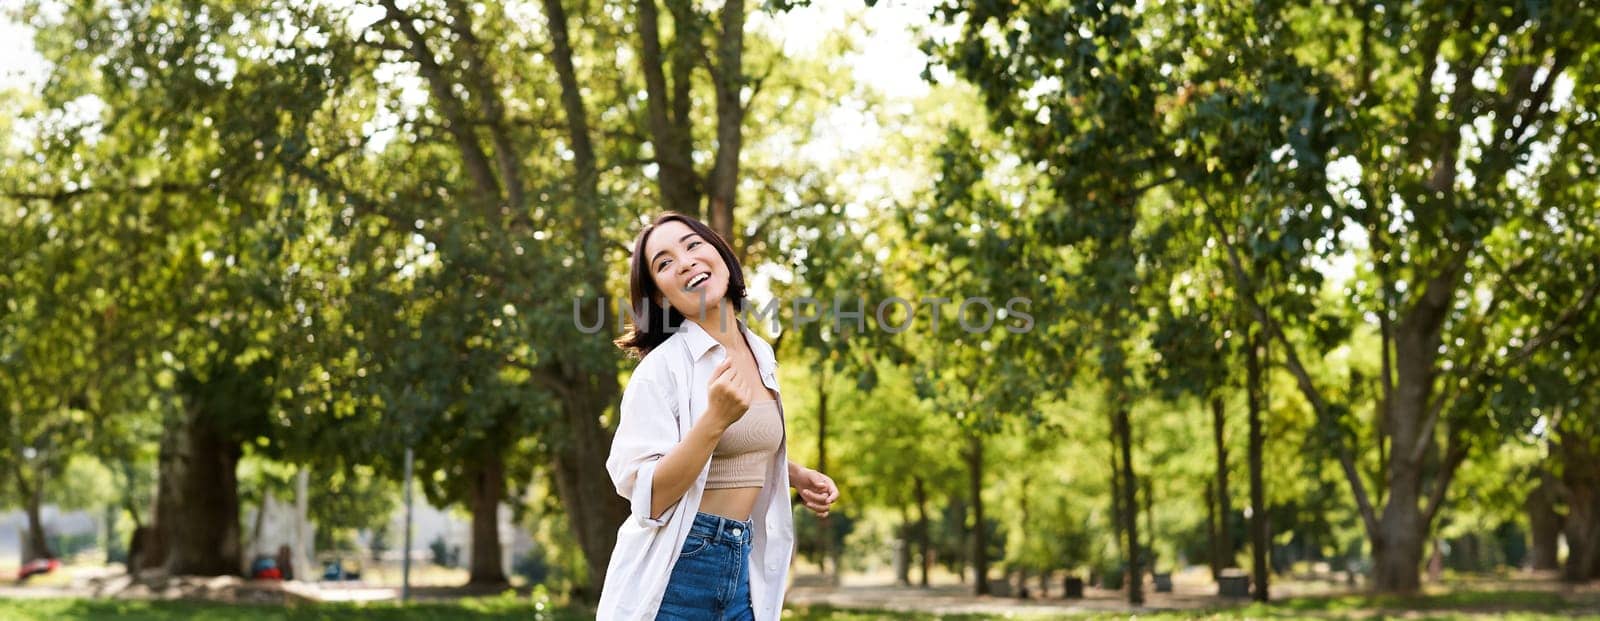 Happy young asian woman walking alone, dancing and singing in park, smiling carefree. People and lifestyle concept.